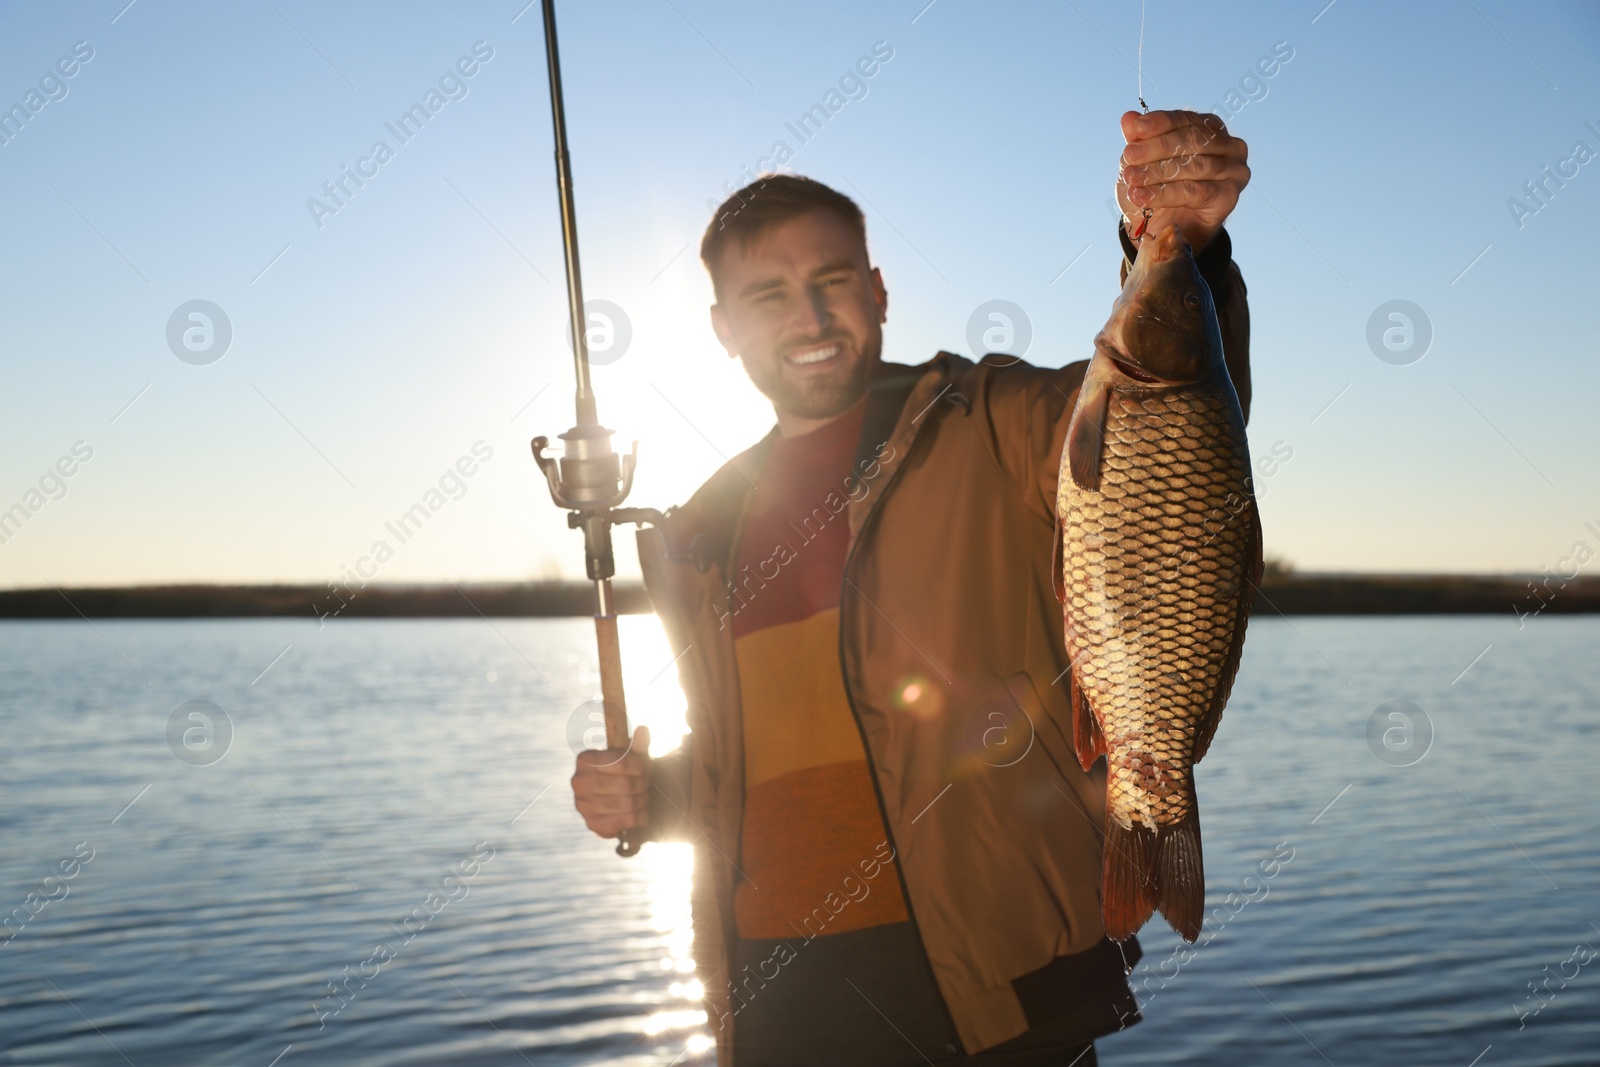 Photo of Fisherman holding rod and catch at riverside, focus on fish